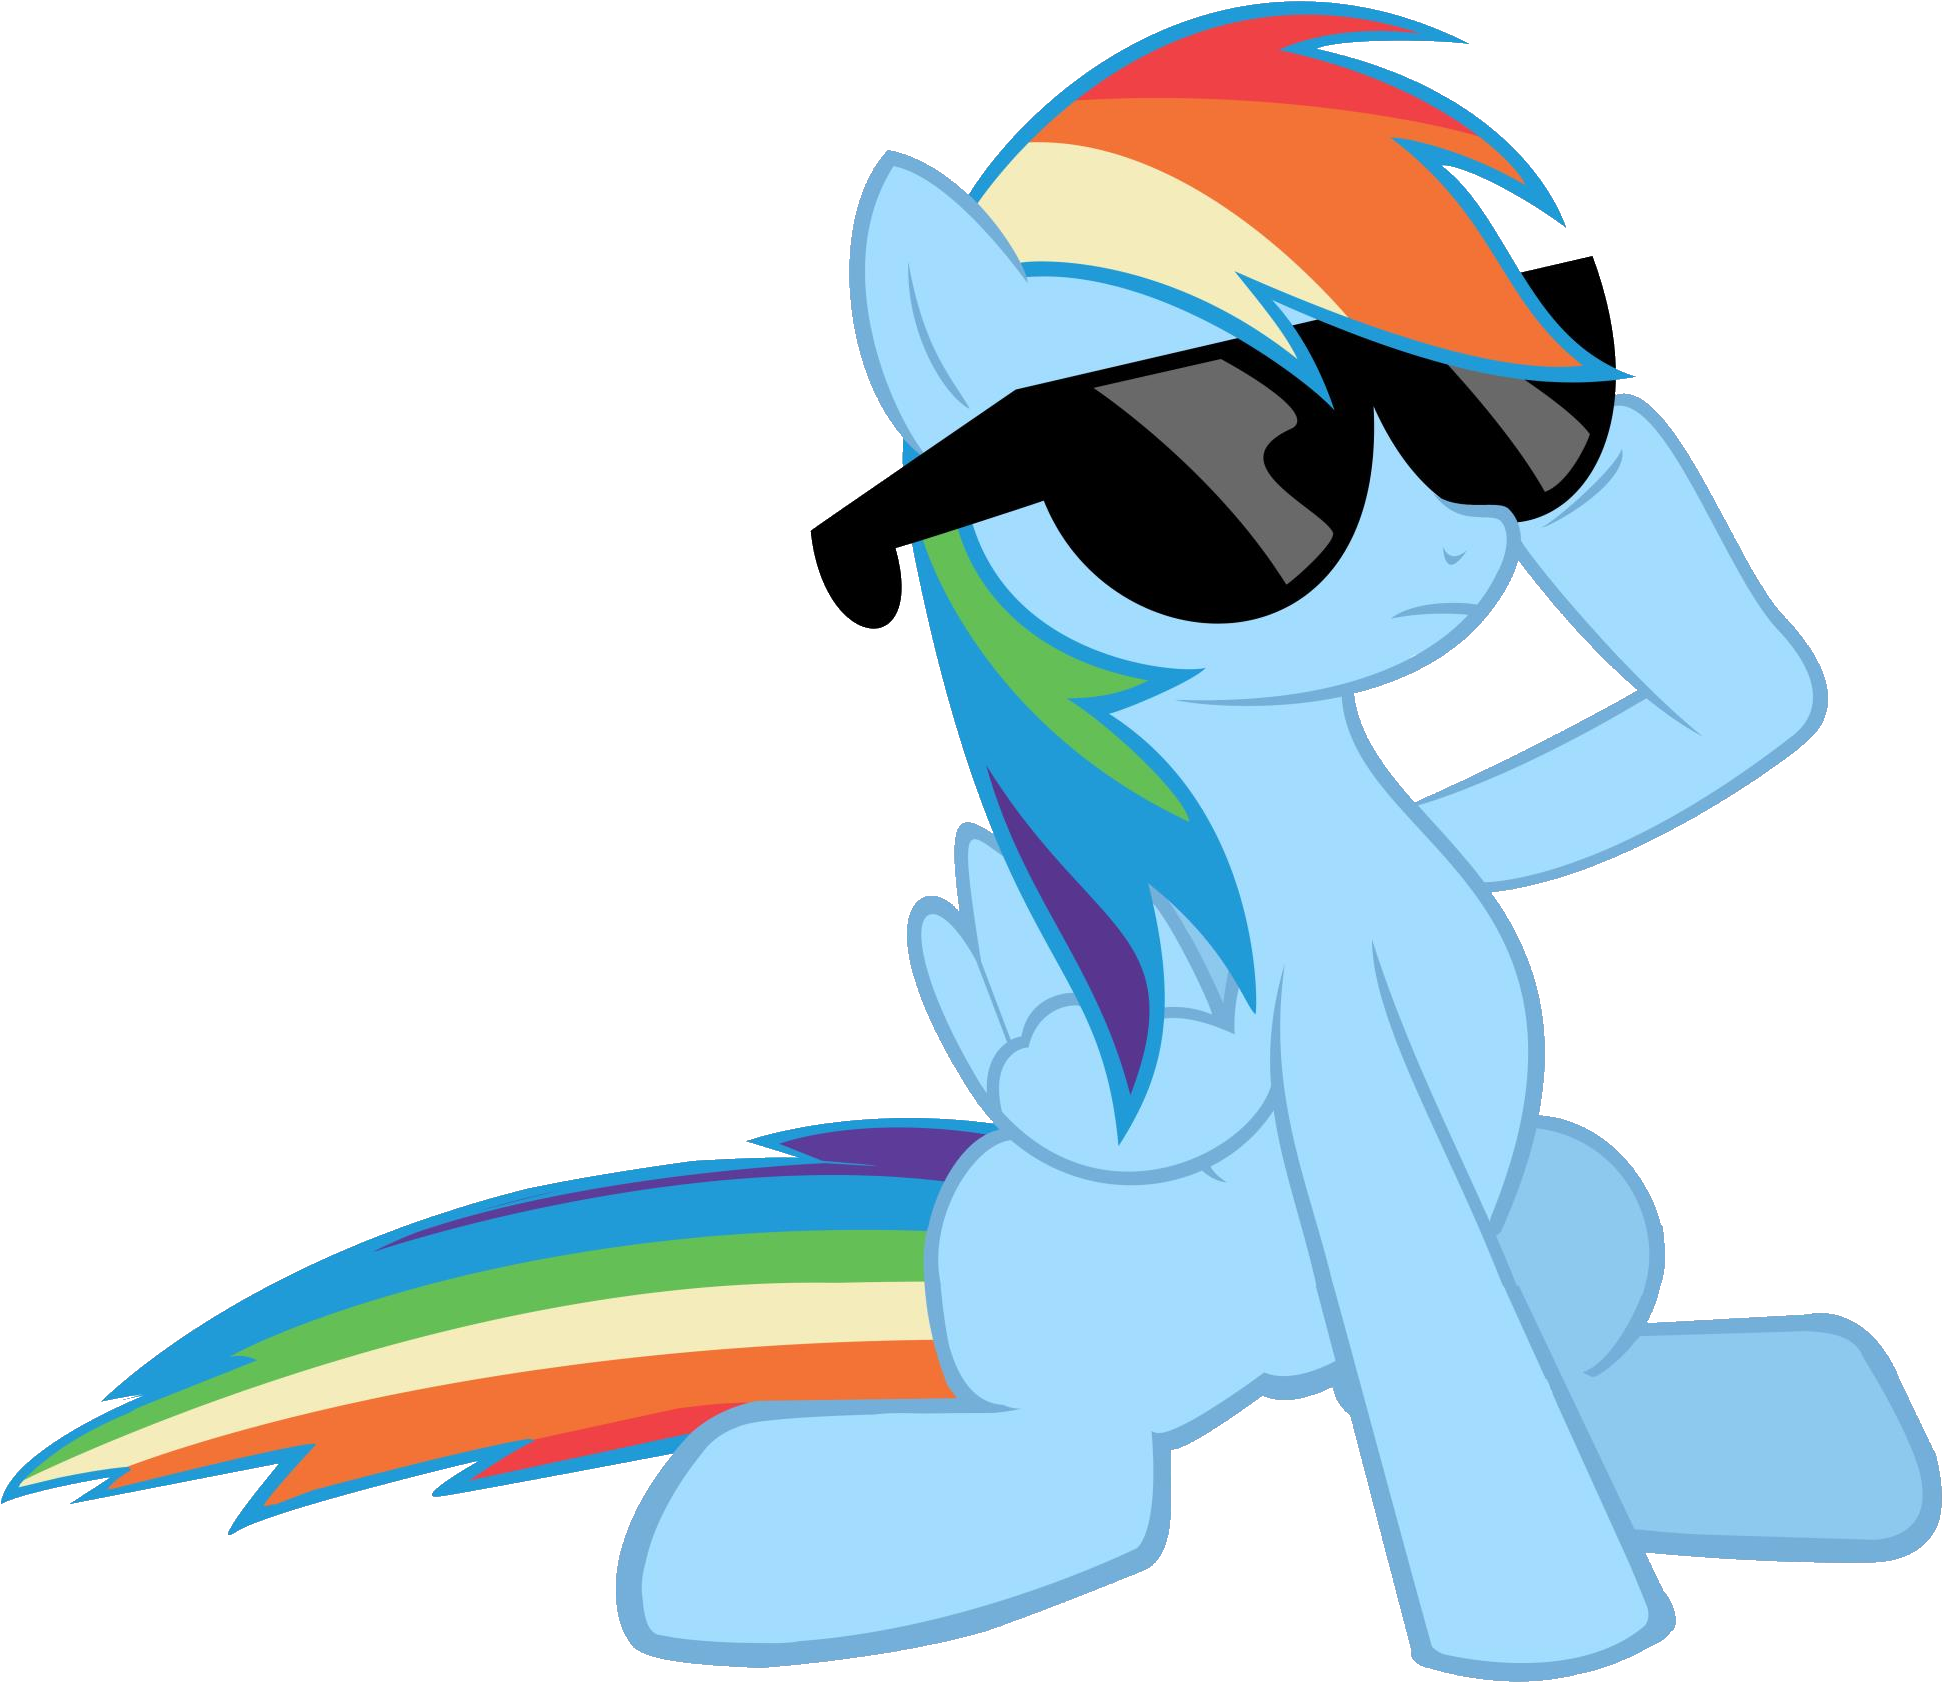 It's Cool To Have Friends At All Speed Levels - My Little Pony Rainbow Dash Sunglasses (2048x1773)